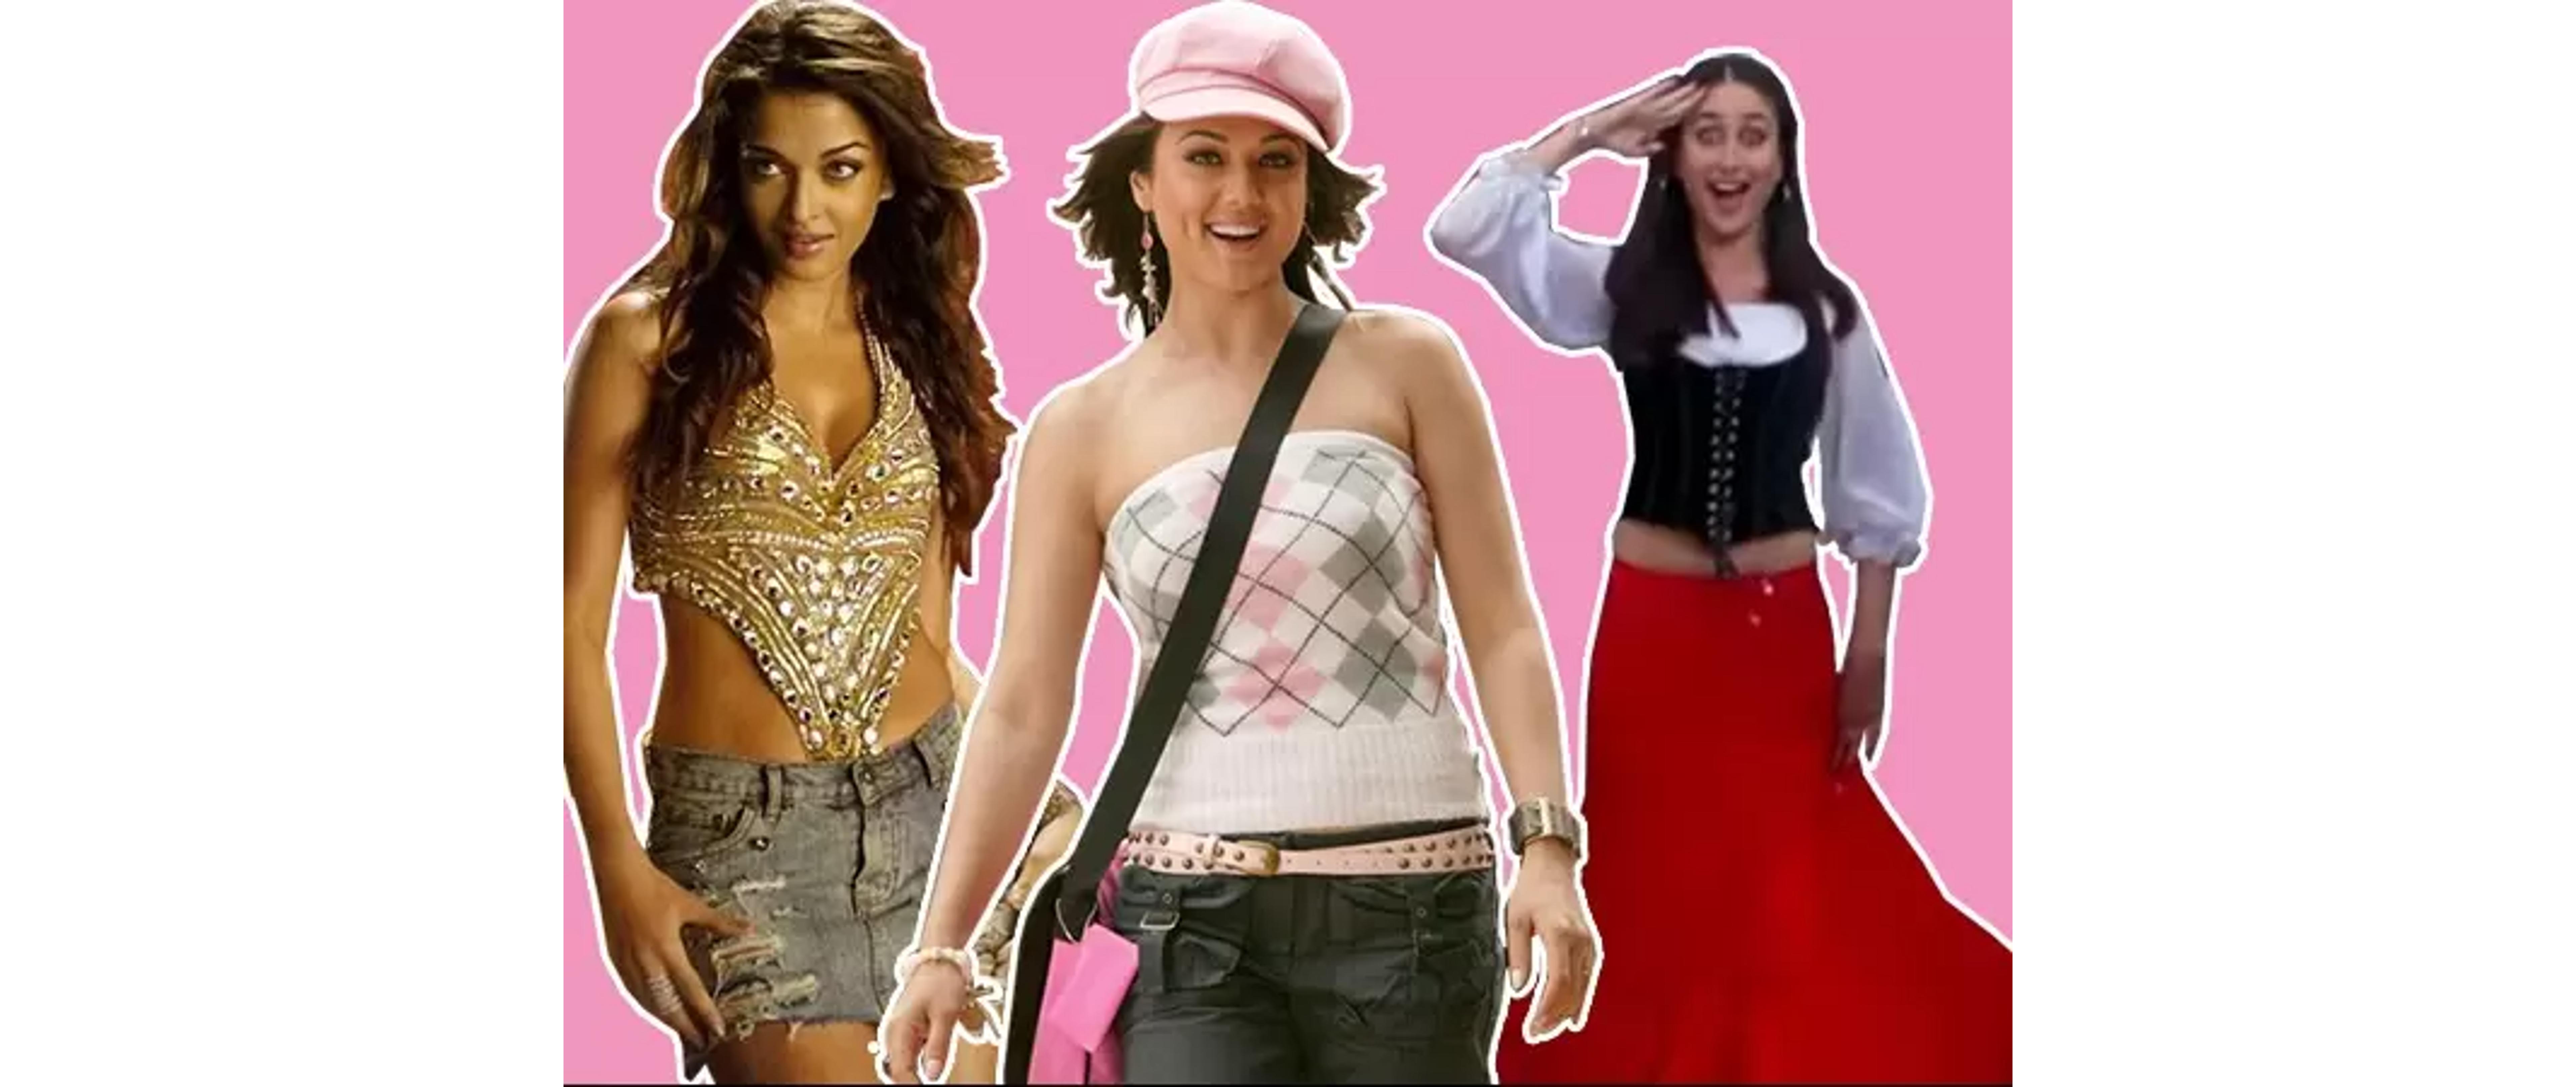 The rise of the internet during this decade ushered in a plethora of changes. Increased NRI-focused content, exotic filming locations, and big-budget movies became the norm. Bollywood queens like Aishwarya Rai, Kareena Kapoor, and Priyanka Chopra dominated the scene, donning outfits with daringly short hemlines. This era celebrated the popularity of crop tops, mini skirts, mini dresses, backless cholis, and bikinis.